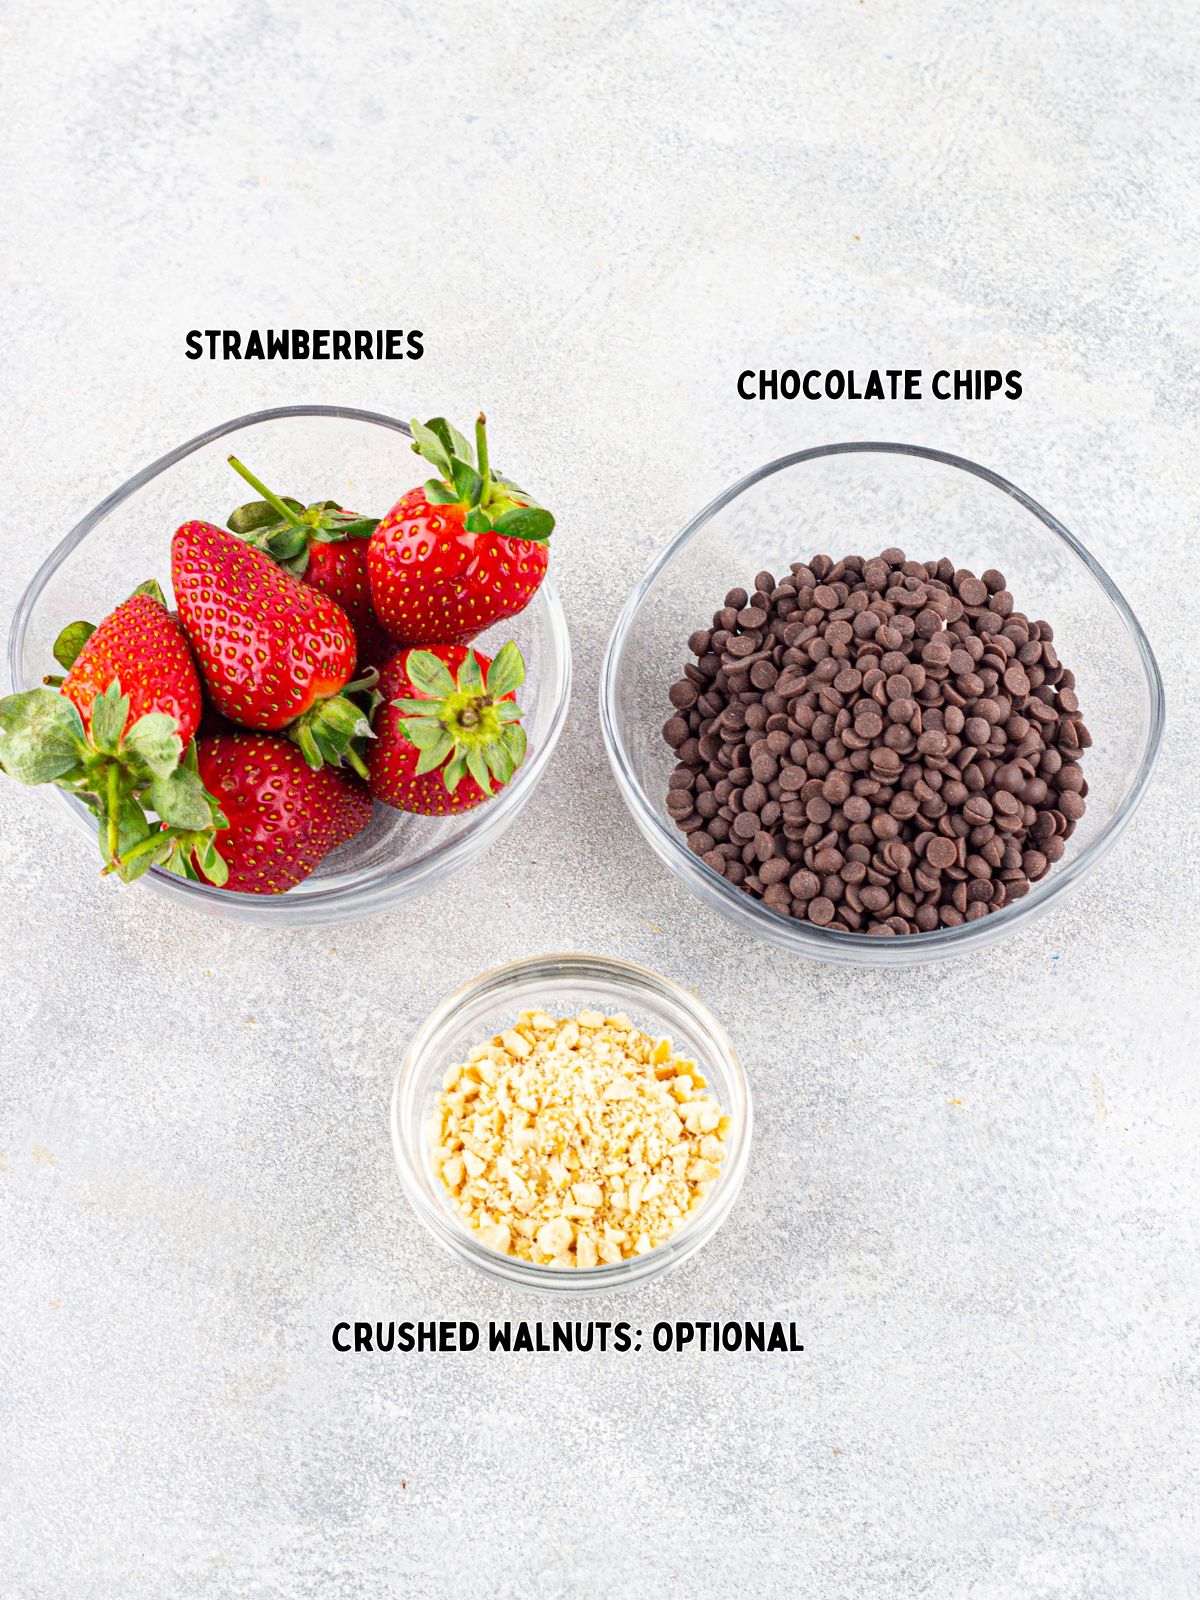 Ingredients for melted chocolate and strawberries.